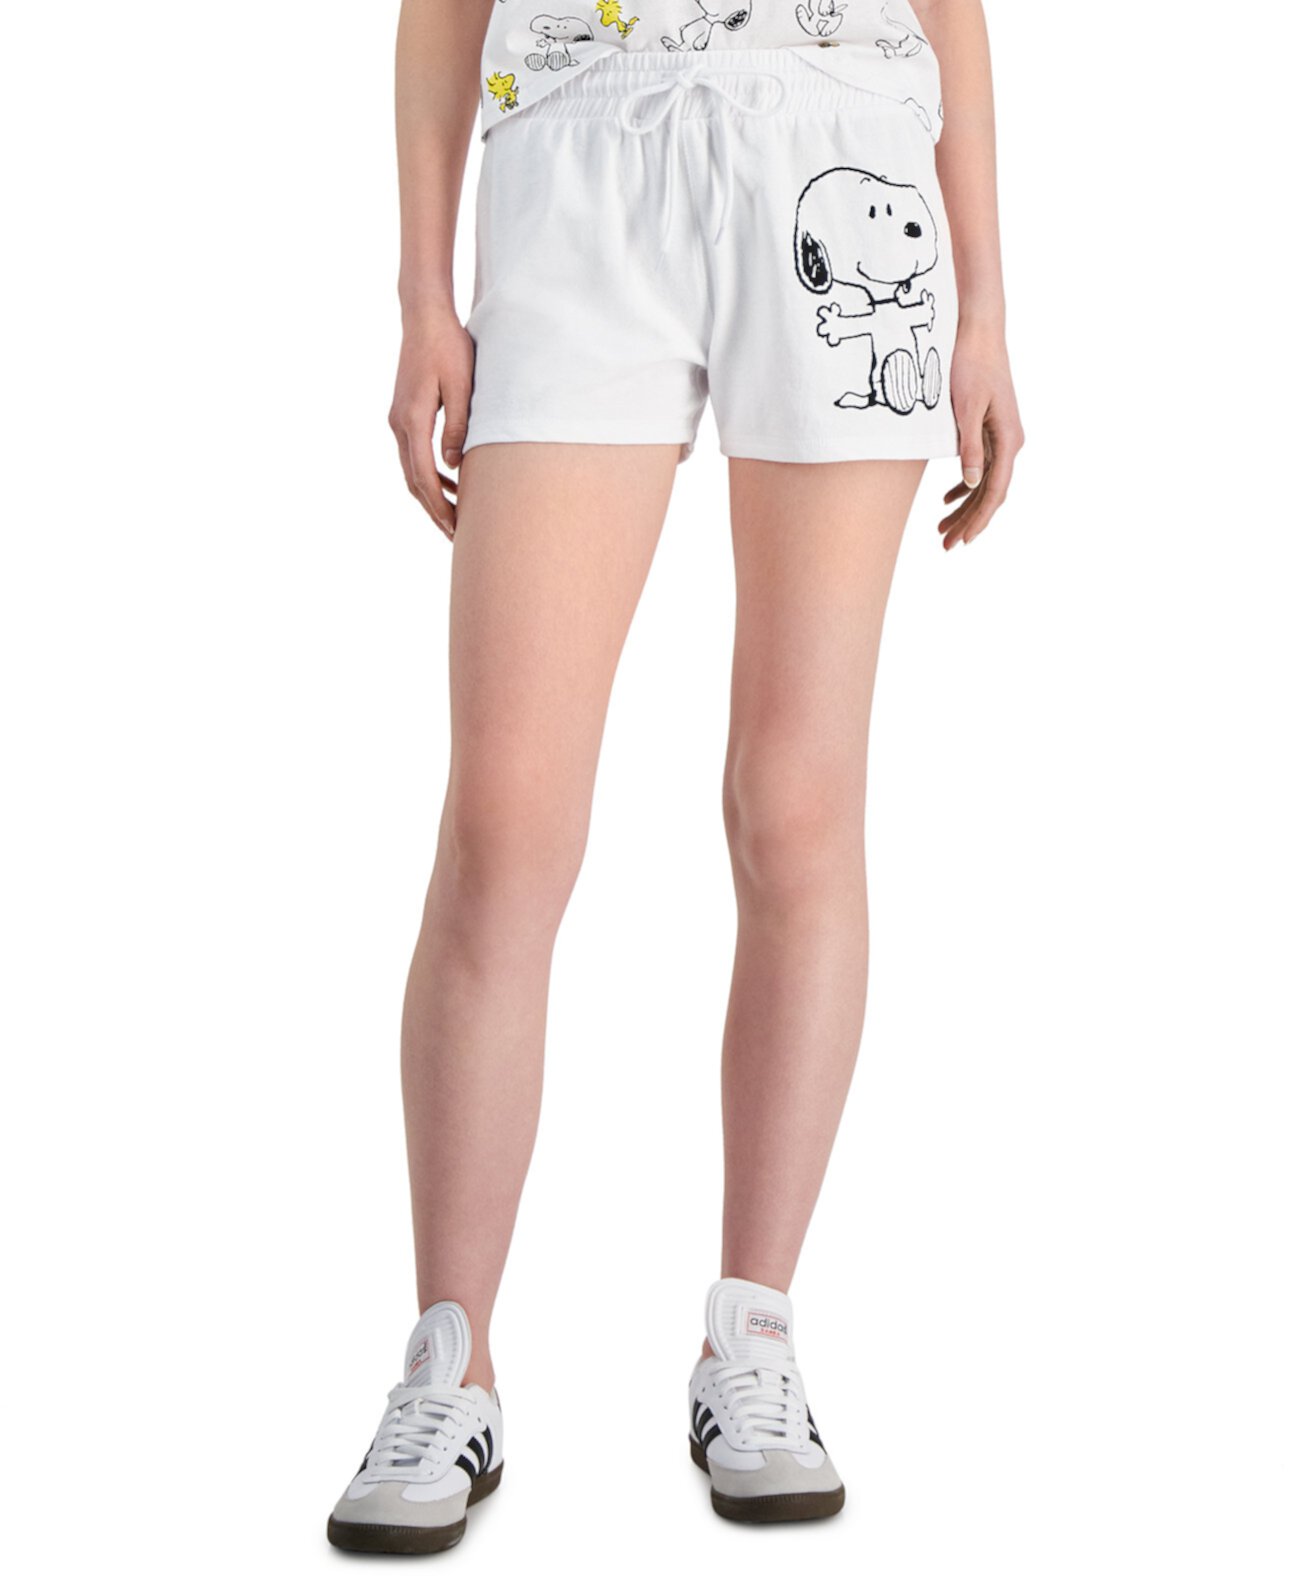 Juniors' Snoopy-Graphic Low-Rise Shorts Snoopy